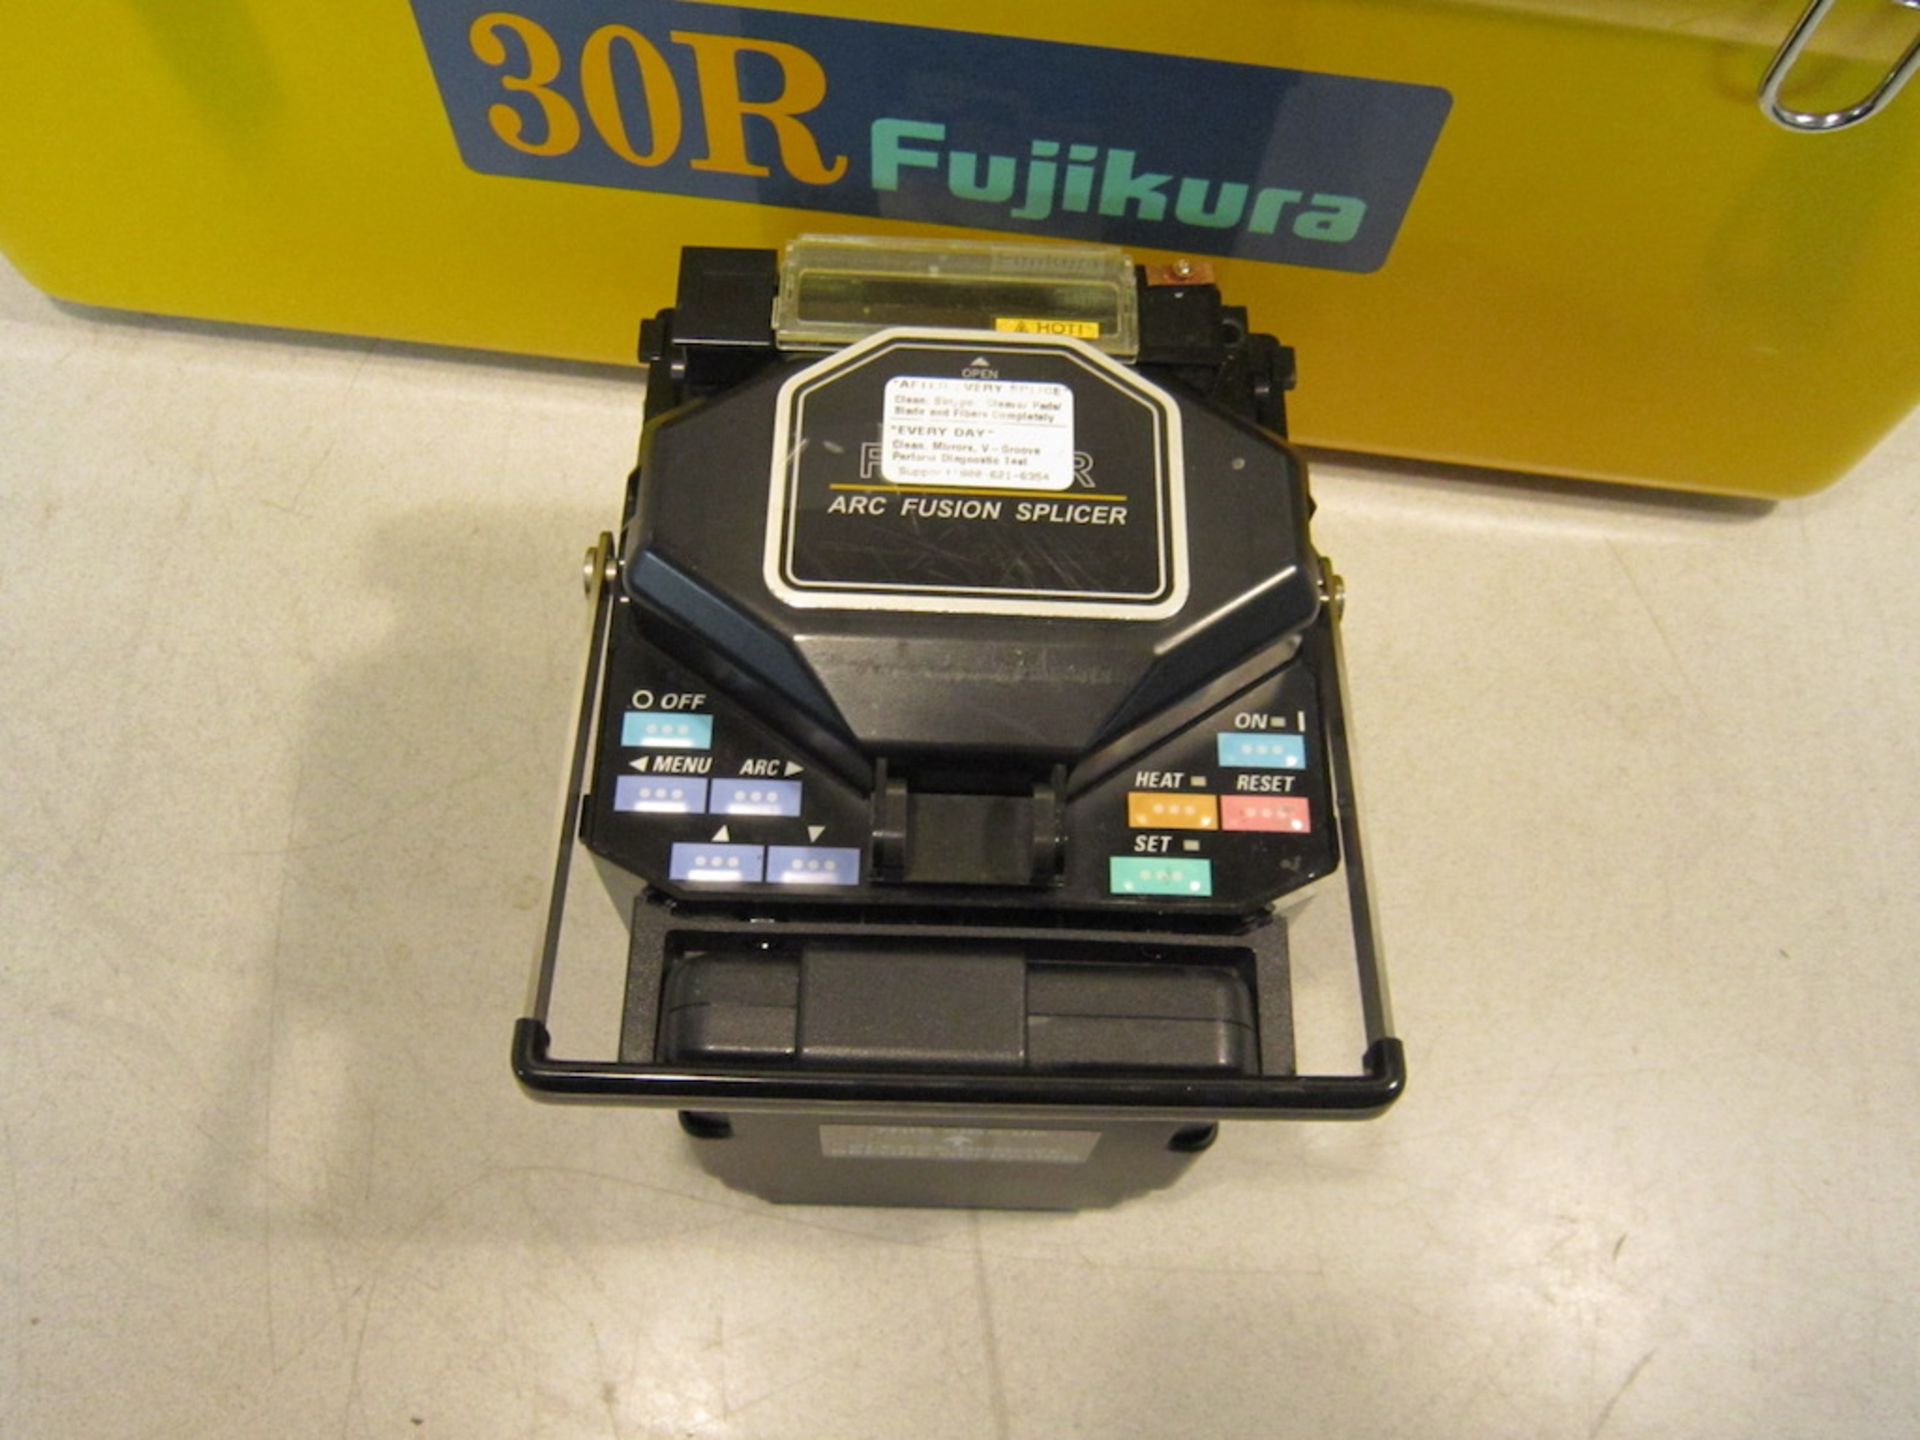 Fujikara 30R Arc Fusion Splicer. one unit used for pictures serial numbers will vary - Image 2 of 11